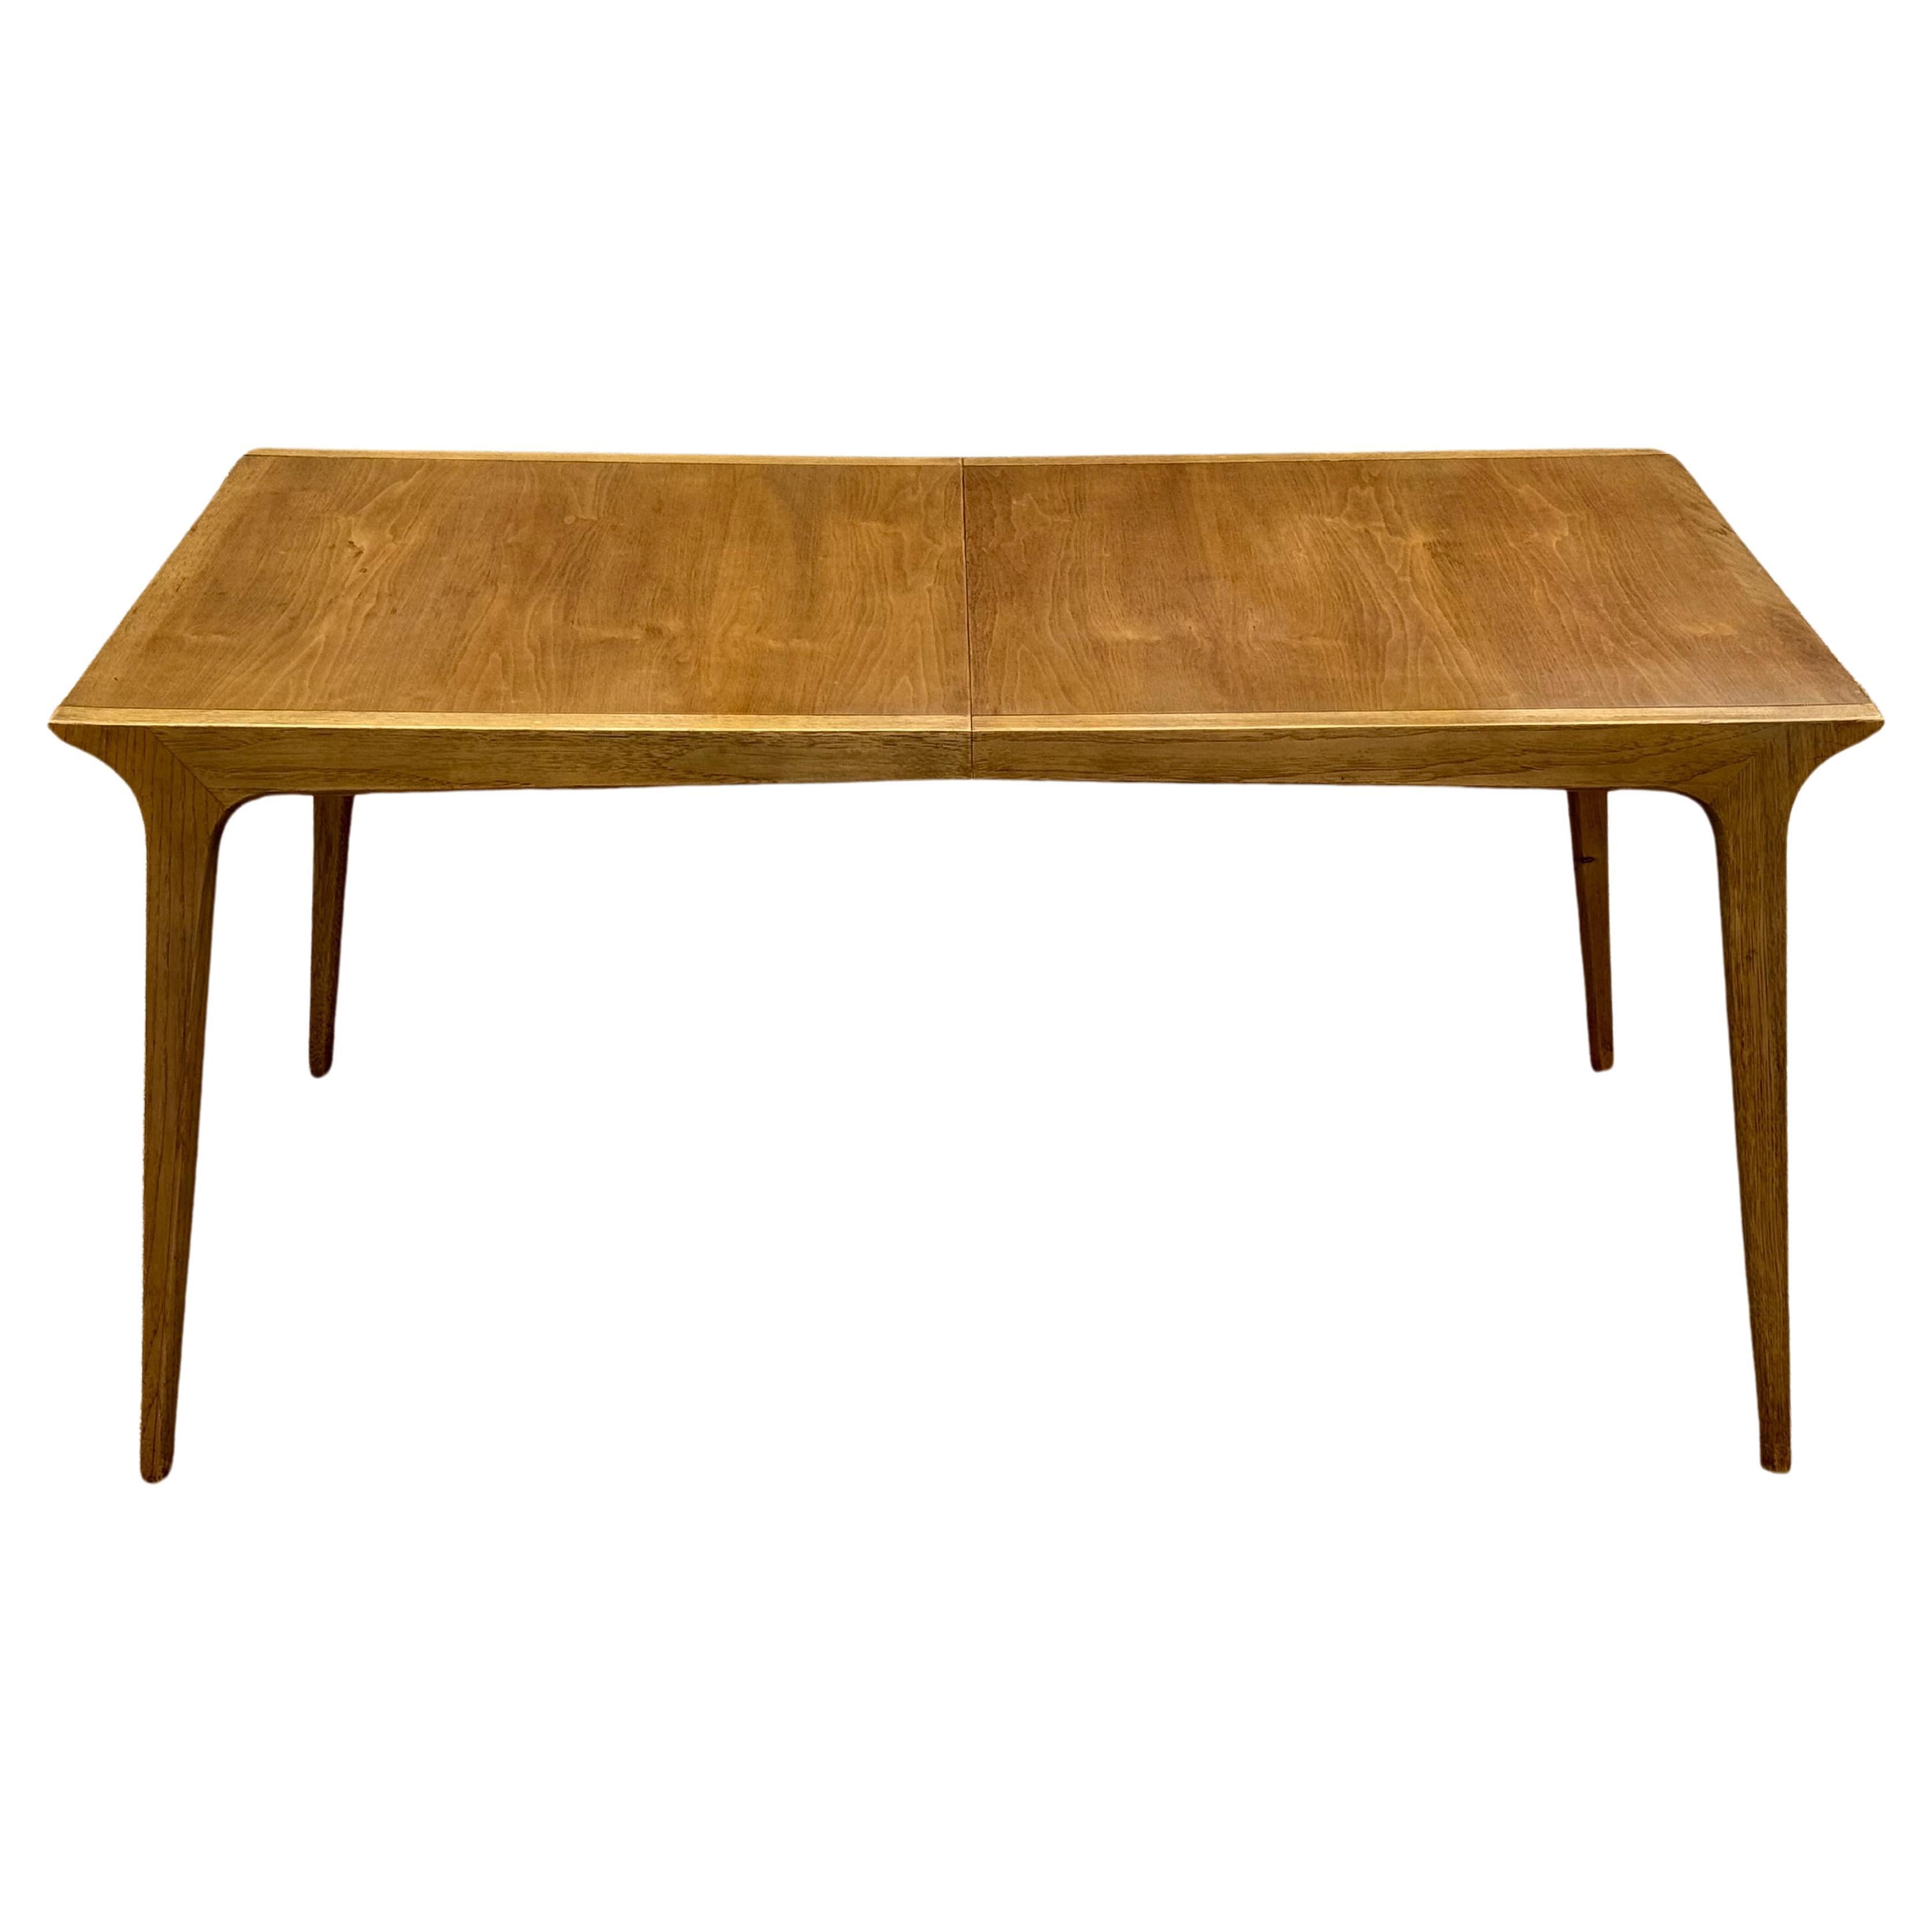 John Van Koert for Drexel designed sculptural & sophisticated architectural form model K-42-4 dining table, designed as part of the classic Profile series. This large walnut extension table comes complete with three 12